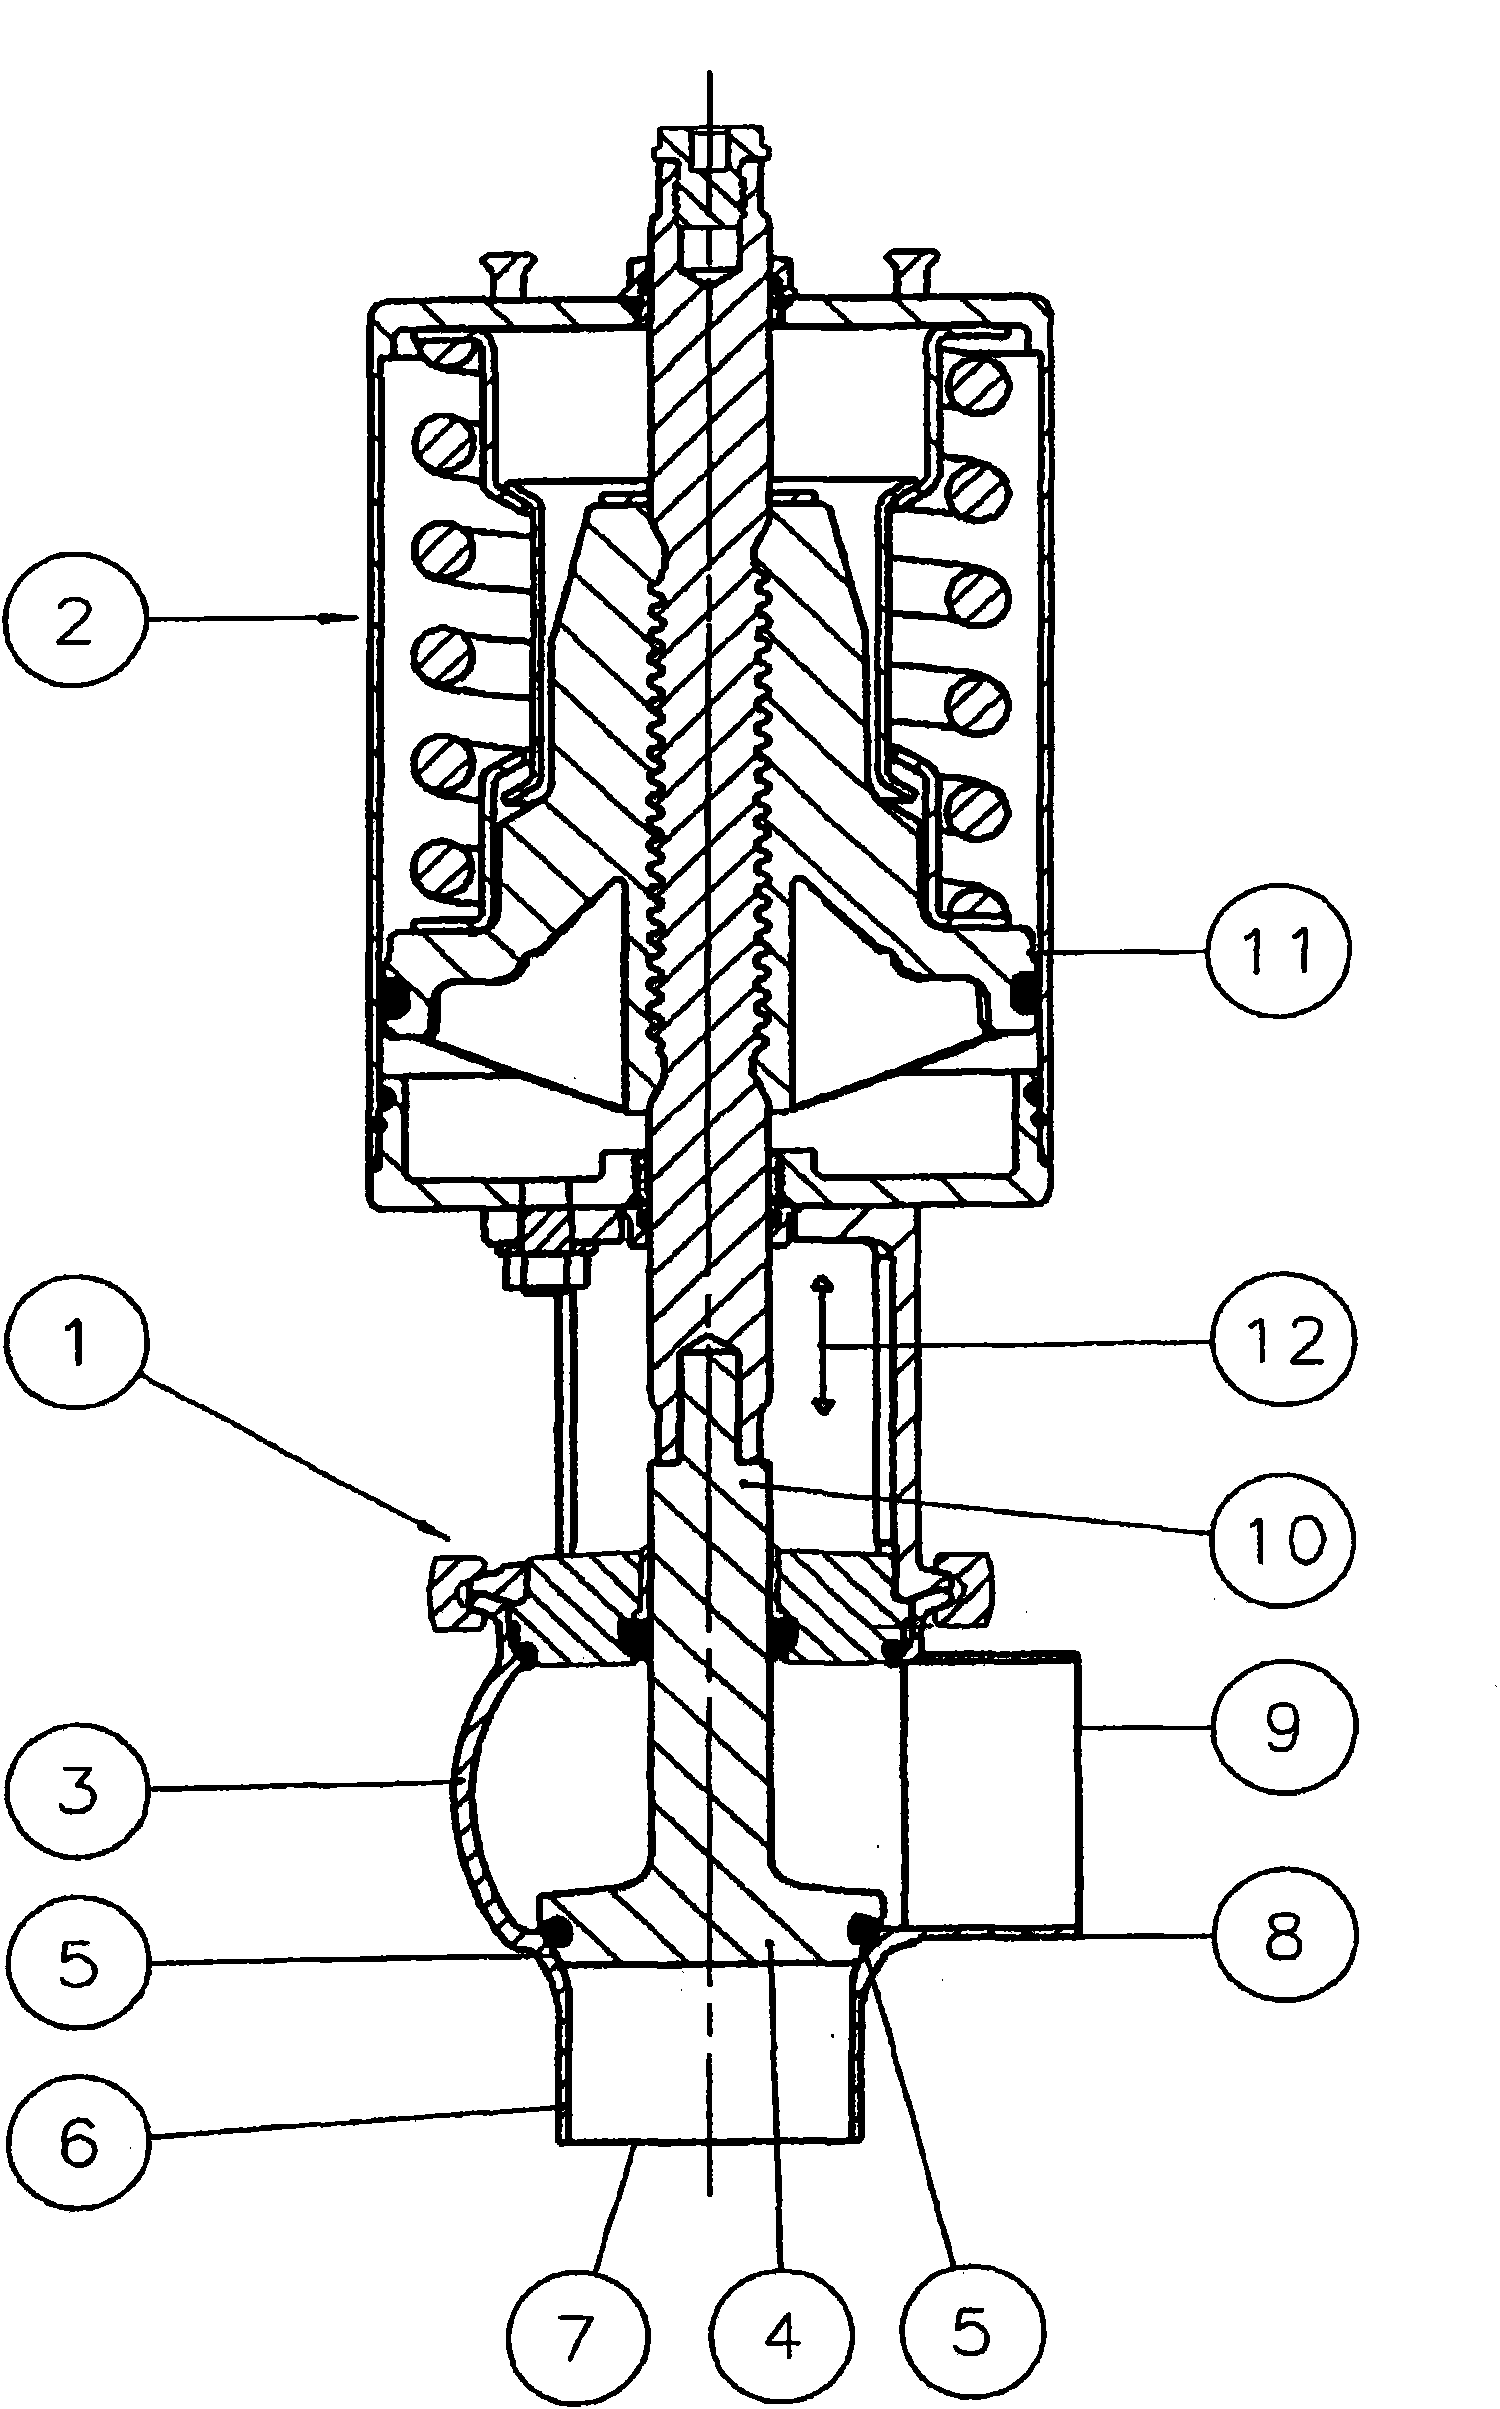 Method for operating a valve